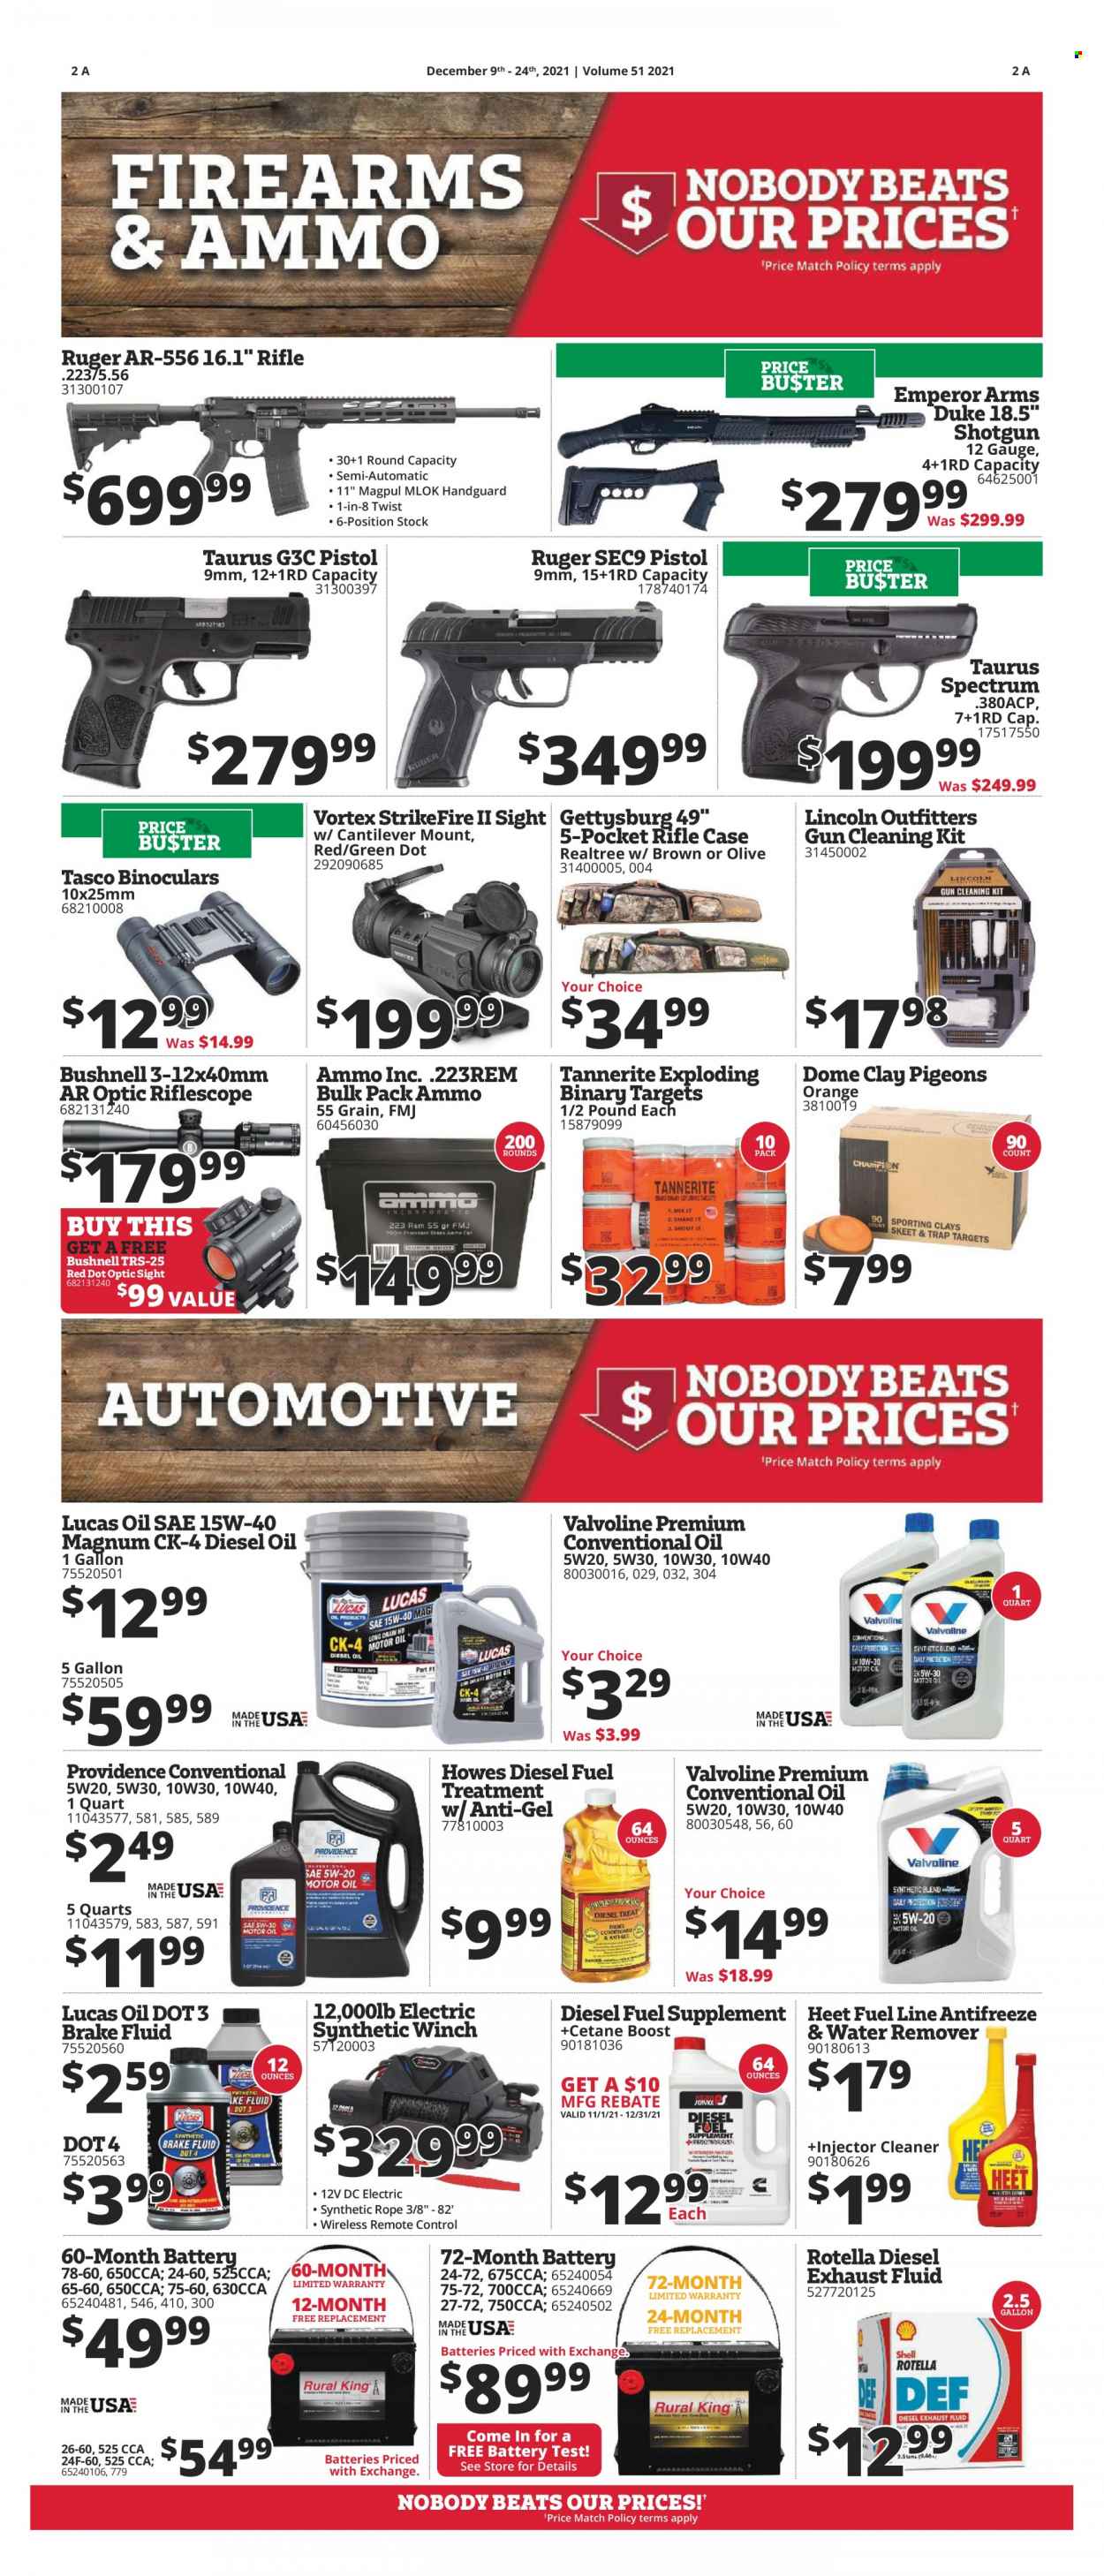 thumbnail - Rural King Flyer - 12/09/2021 - 12/24/2021 - Sales products - Boost, remote control, binoculars, riflescope, Ruger, Magpul, ammo, gun cleaning kit, winch, Lucas, injector cleaner, cleaner, antifreeze, water remover, Rotella, fuel supplement, Valvoline, brake fluid, diesel oil, conventional oil, exhaust fluid. Page 2.